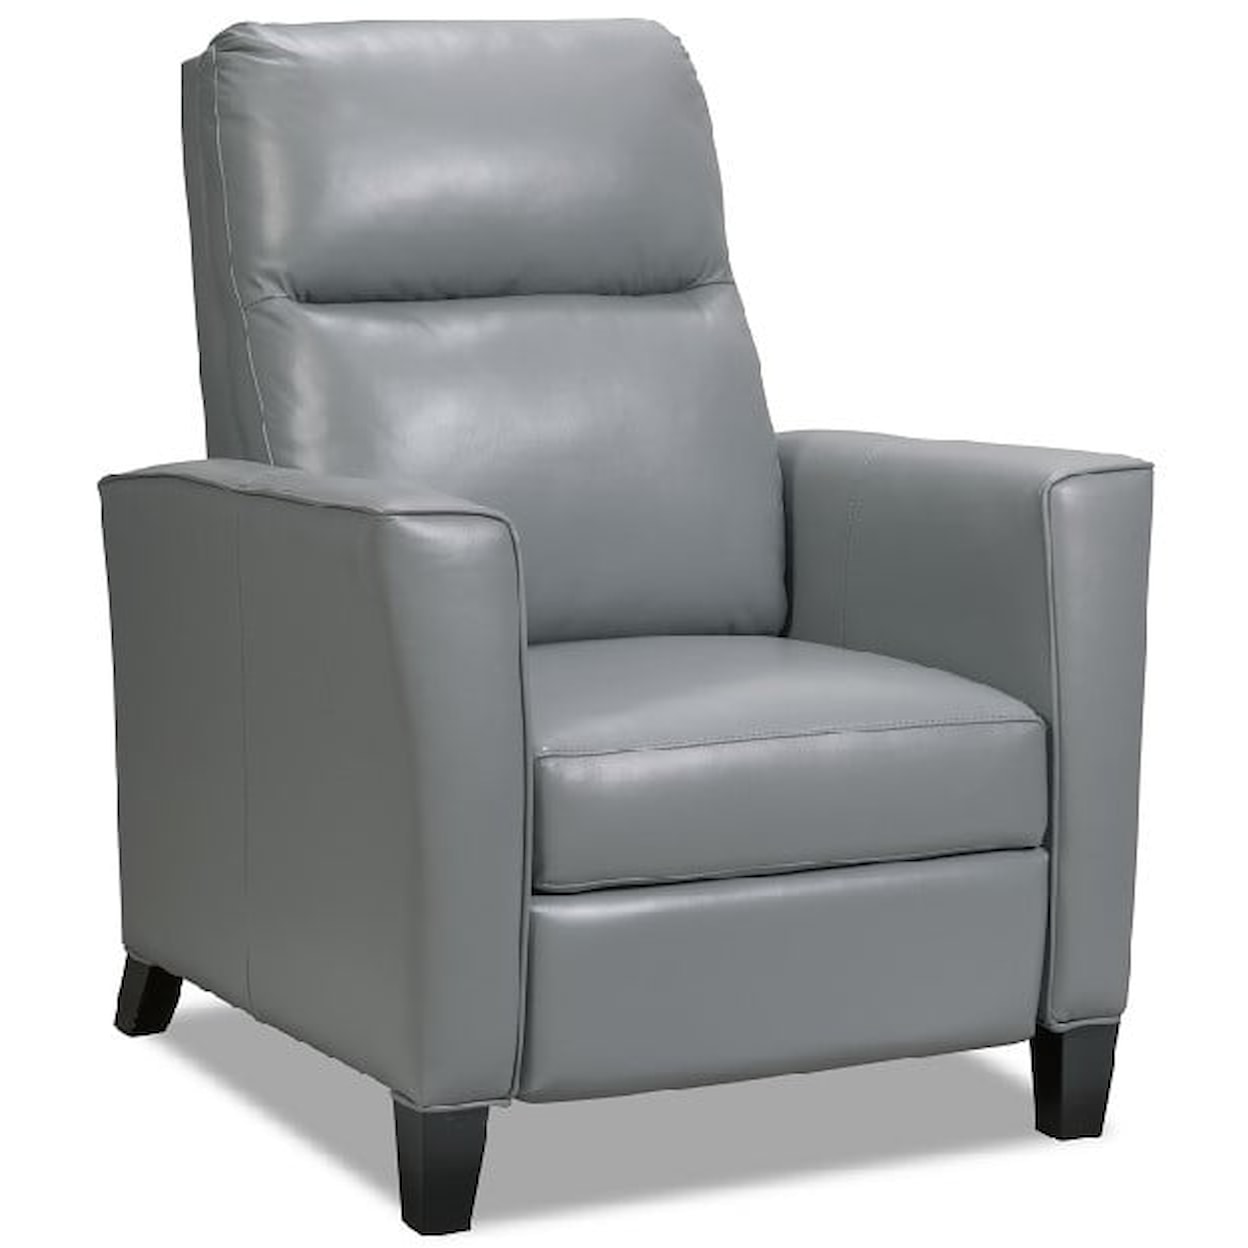 Southside Designs Myles Leather Push Back Recliner